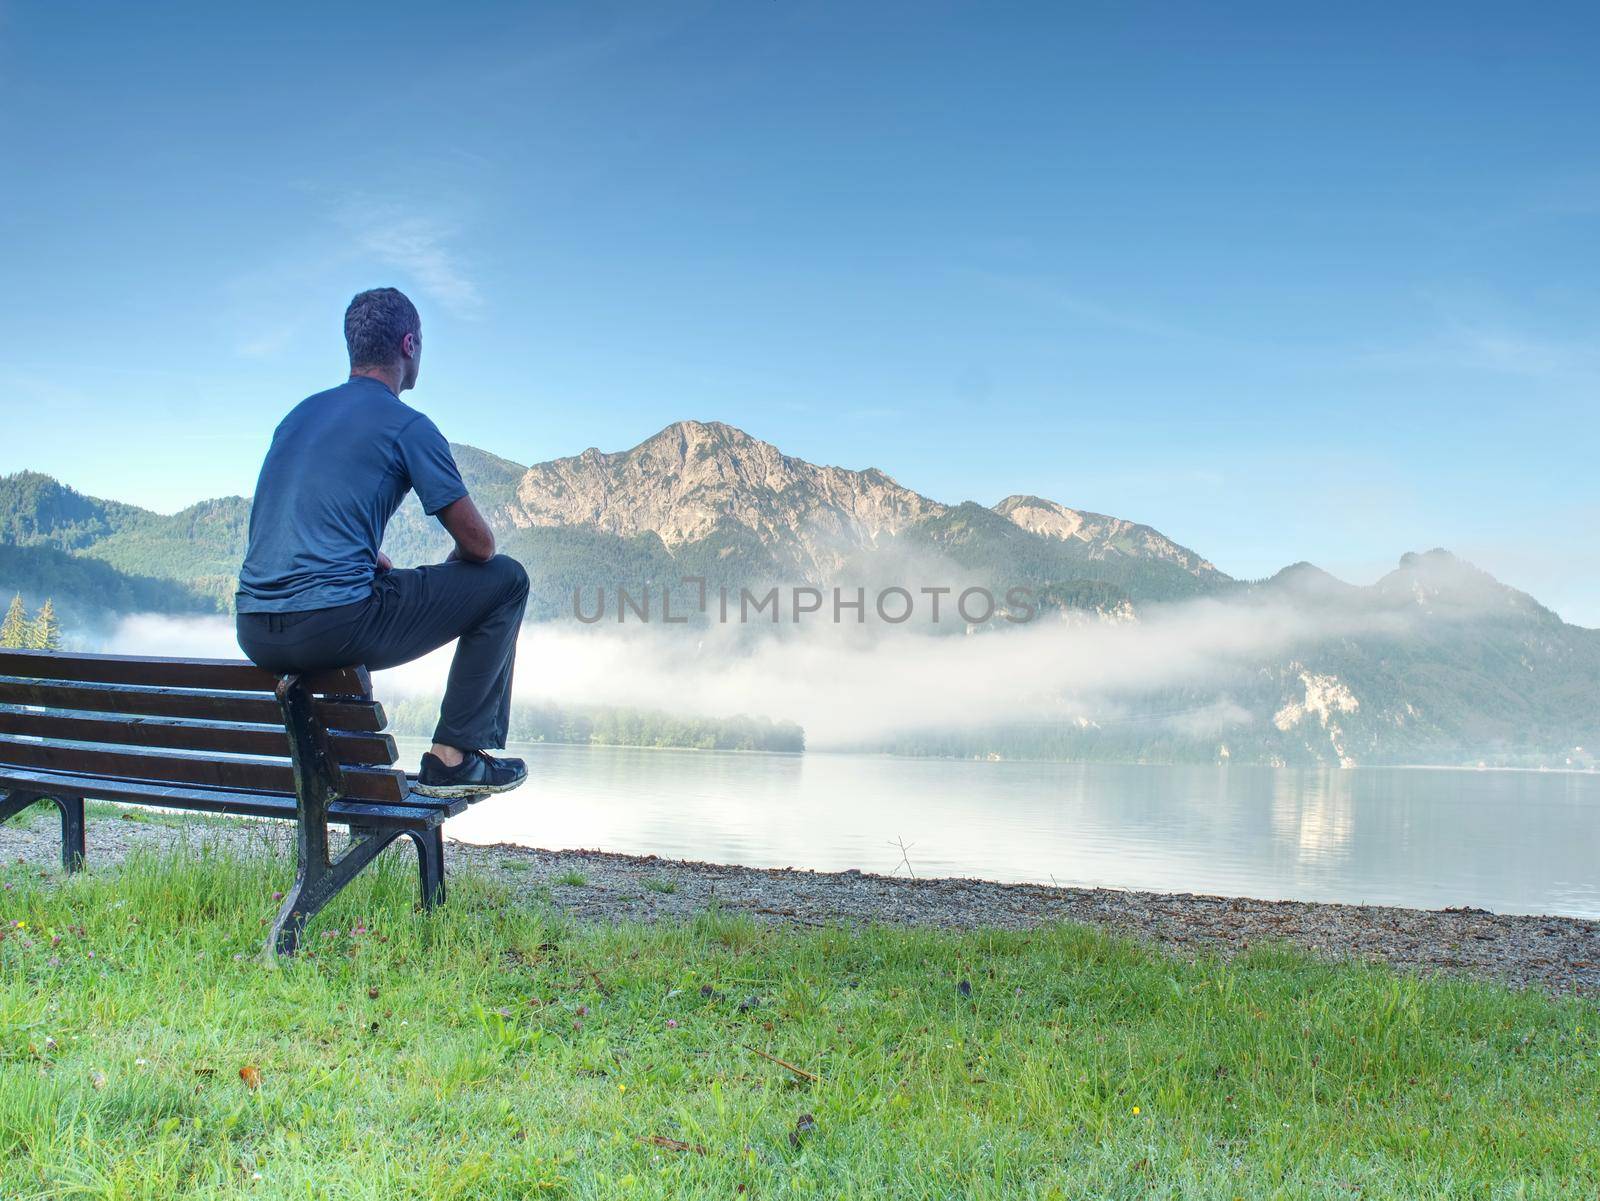 Man sit on wooden bench at coast of lake bellow blue mountains by rdonar2